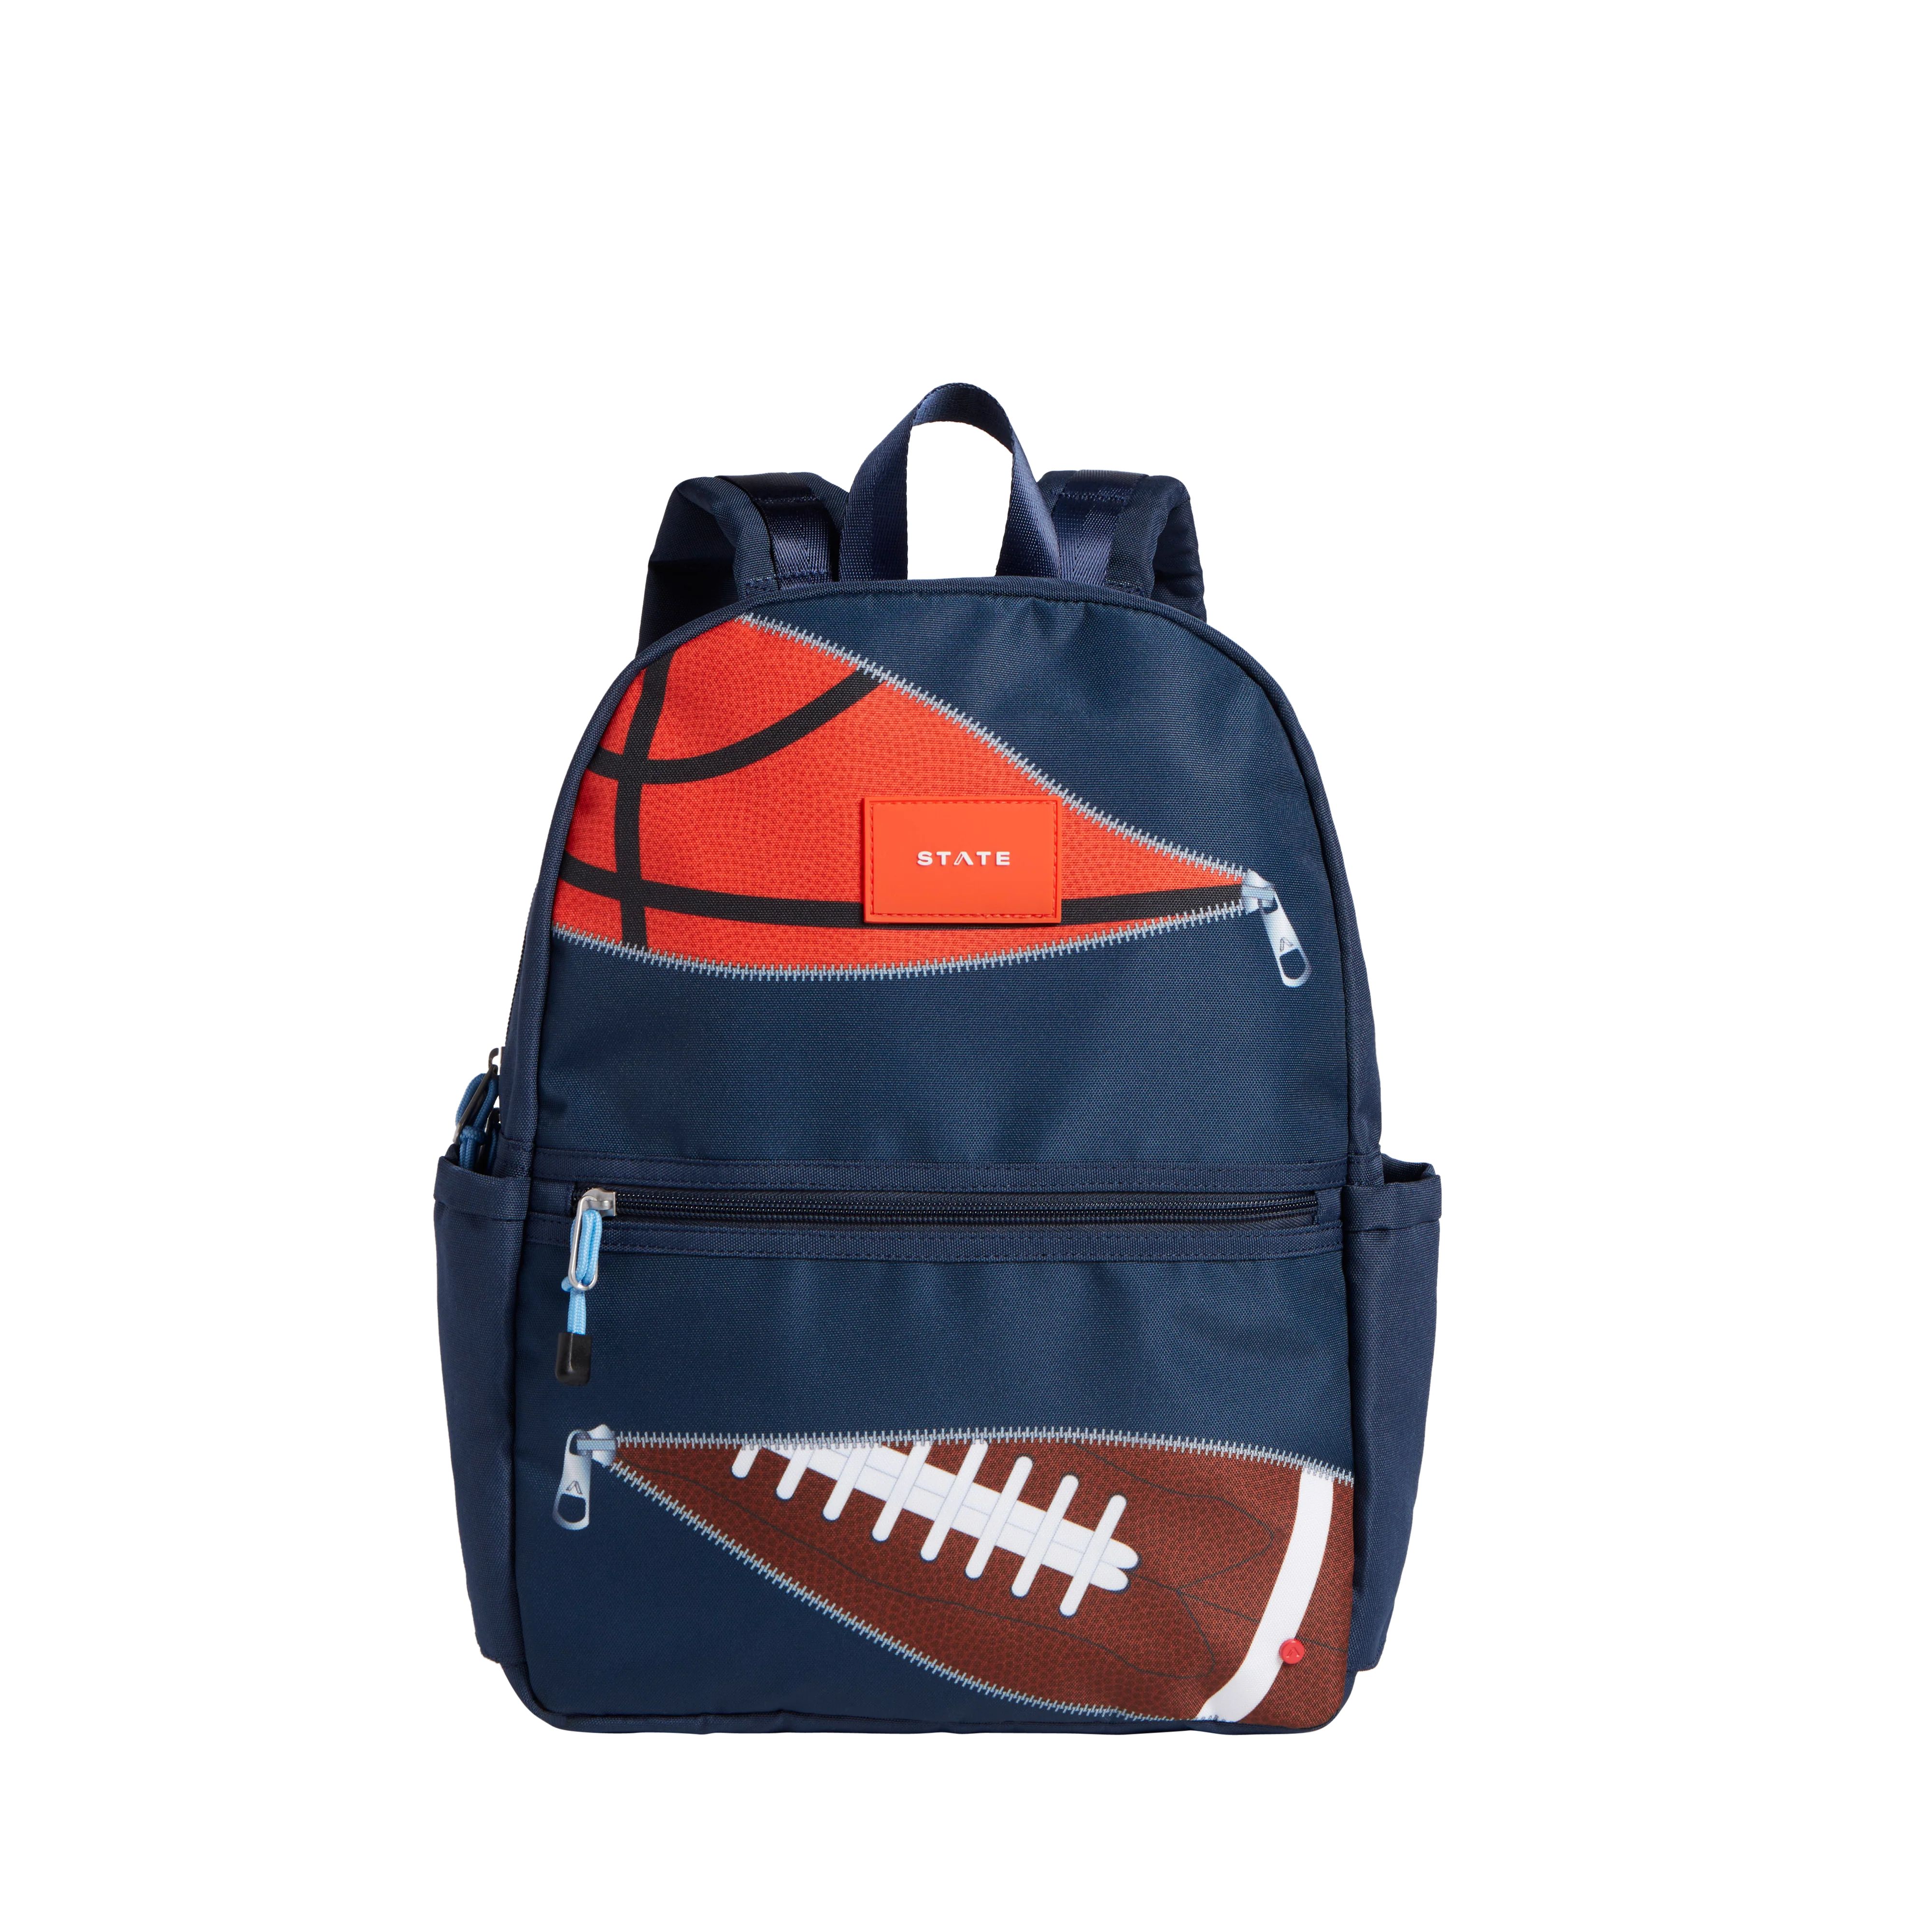 STATE Bags | Kane Kids Backpack Printed Canvas Sports | STATE Bags